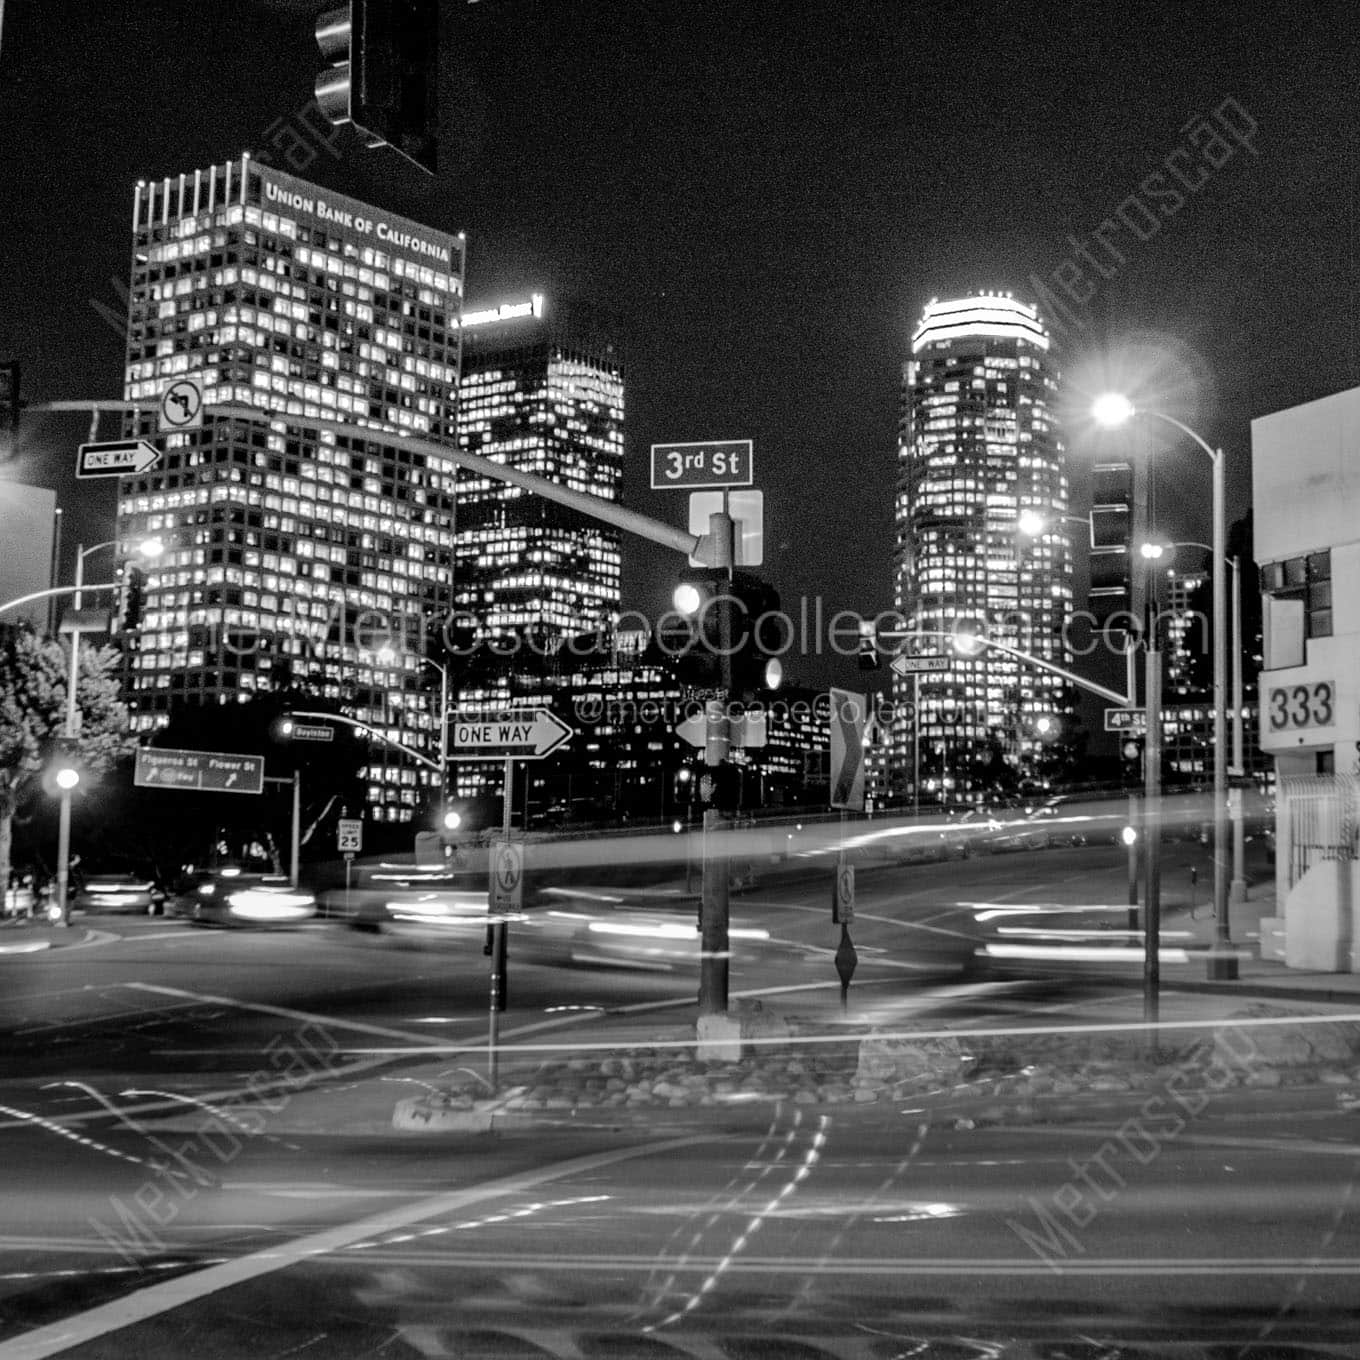 3rd 4th at beaudry downtown la Black & White Office Art